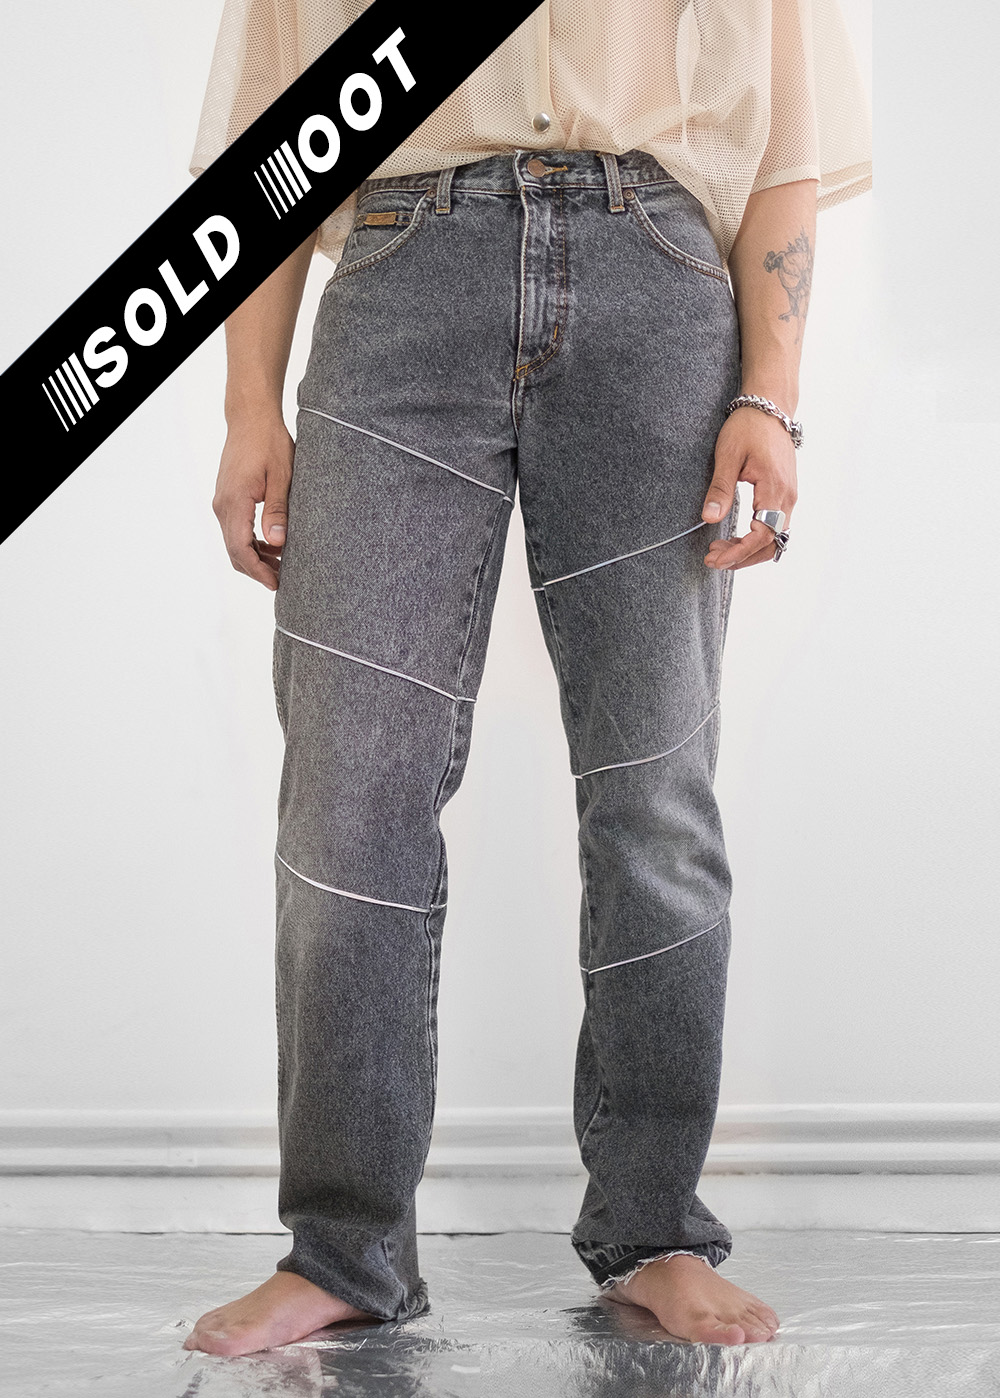 Reworked Reflective Jeans 265